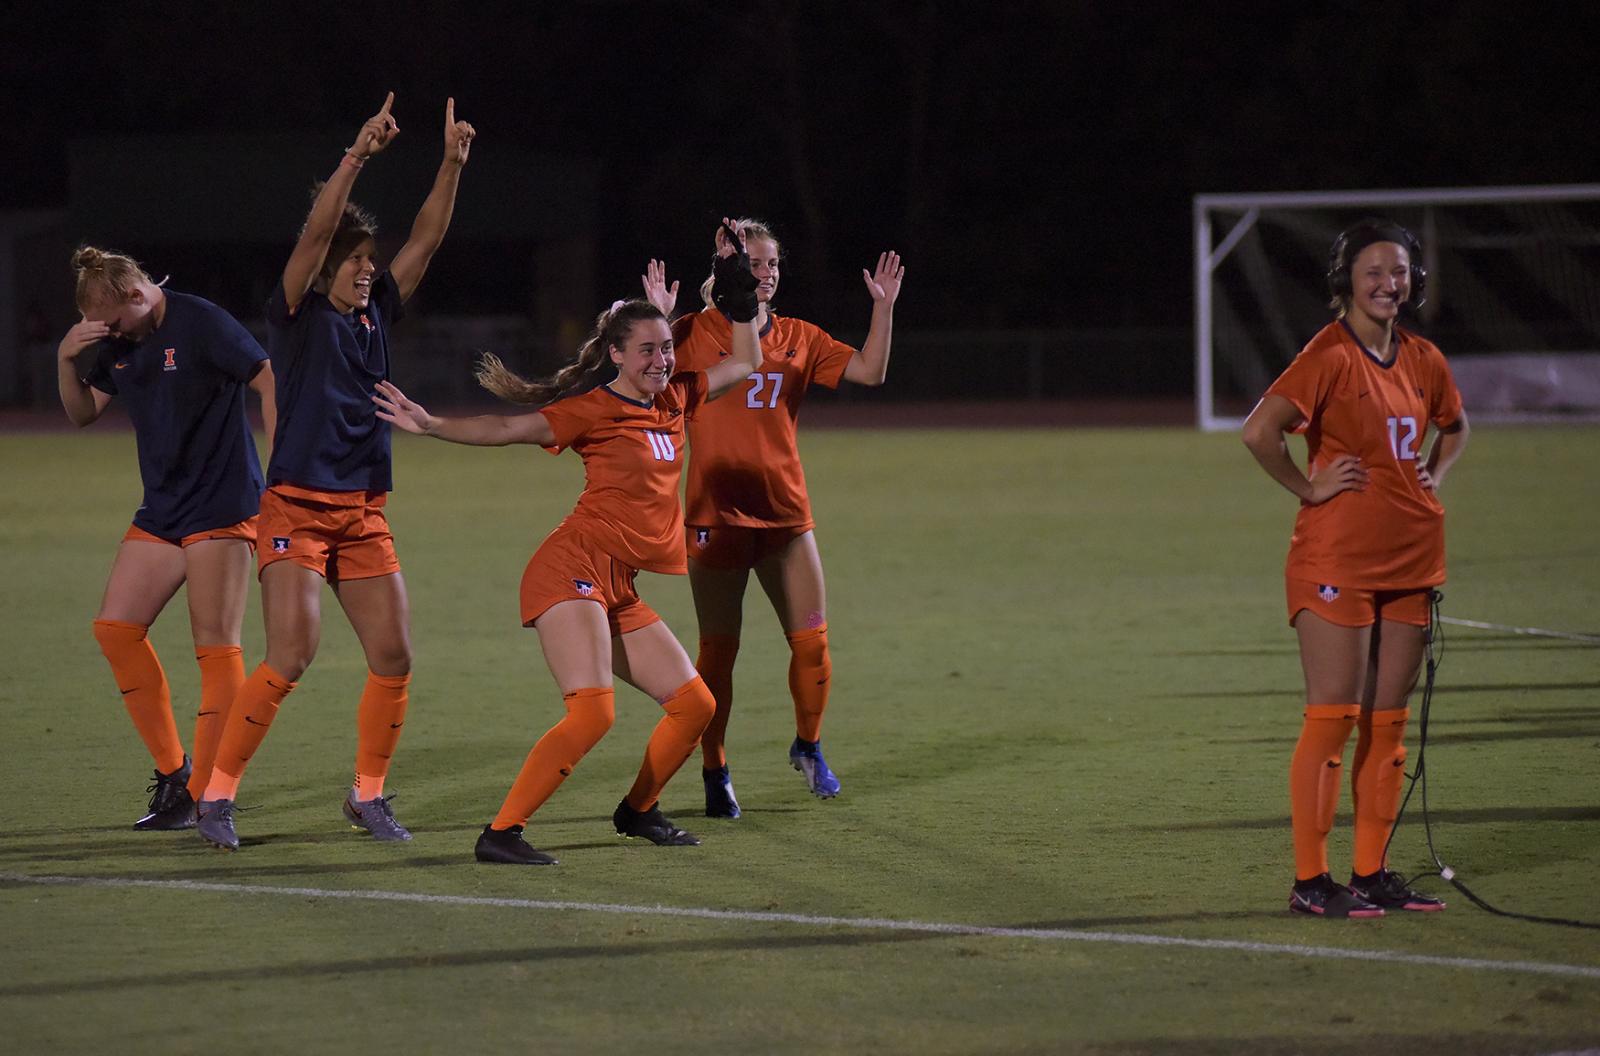 Illinois players dance behind Kendra Pasquale, far right, on Thursday, August 19, 2021 at Audrey J. Walton Soccer Stadium in Columbia. Pasquale had scored one goal during the game against Missouri.&nbsp;